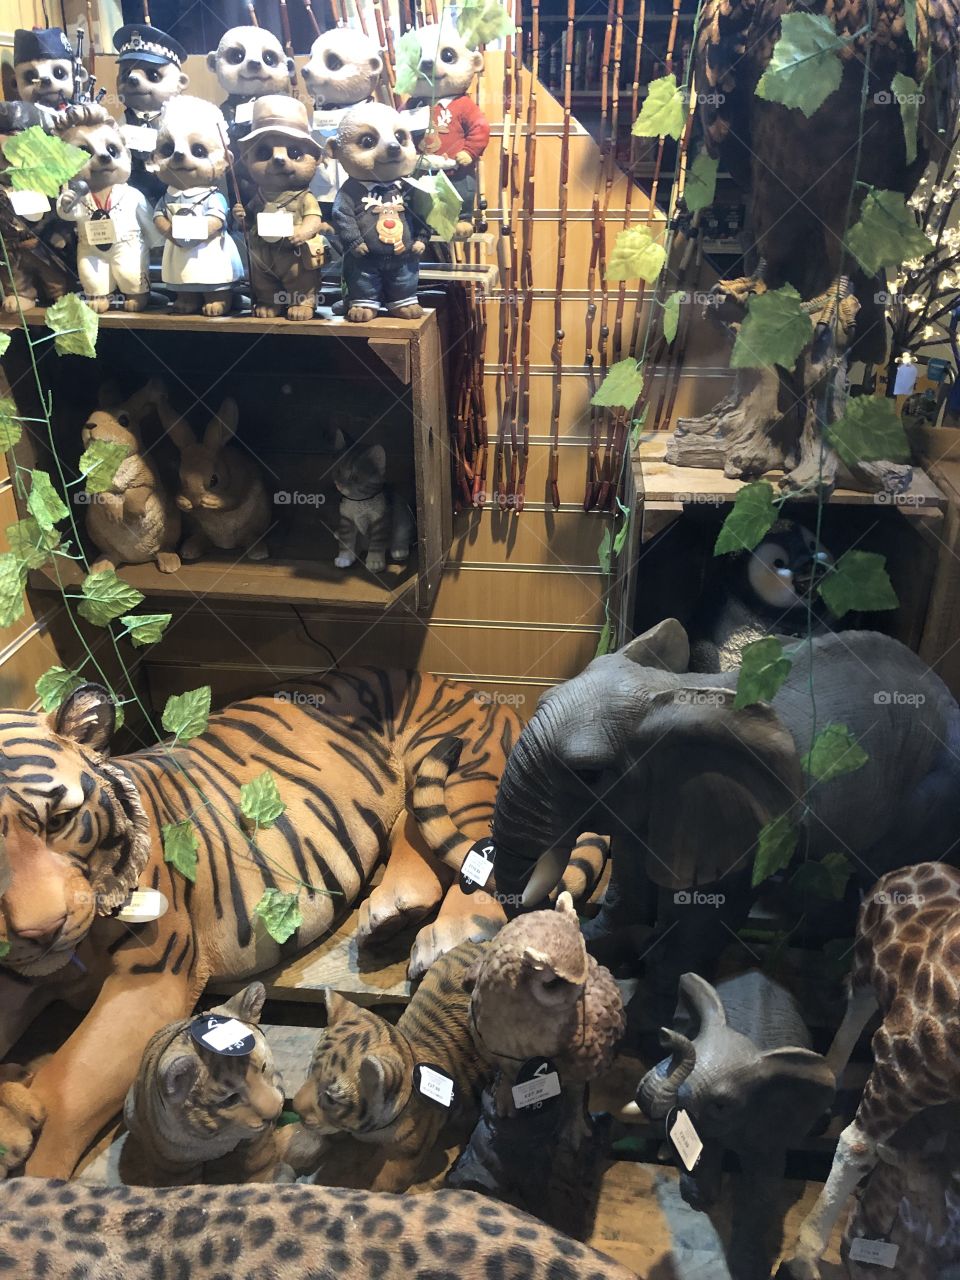 A shop window full of animals, l was quite fascinated.